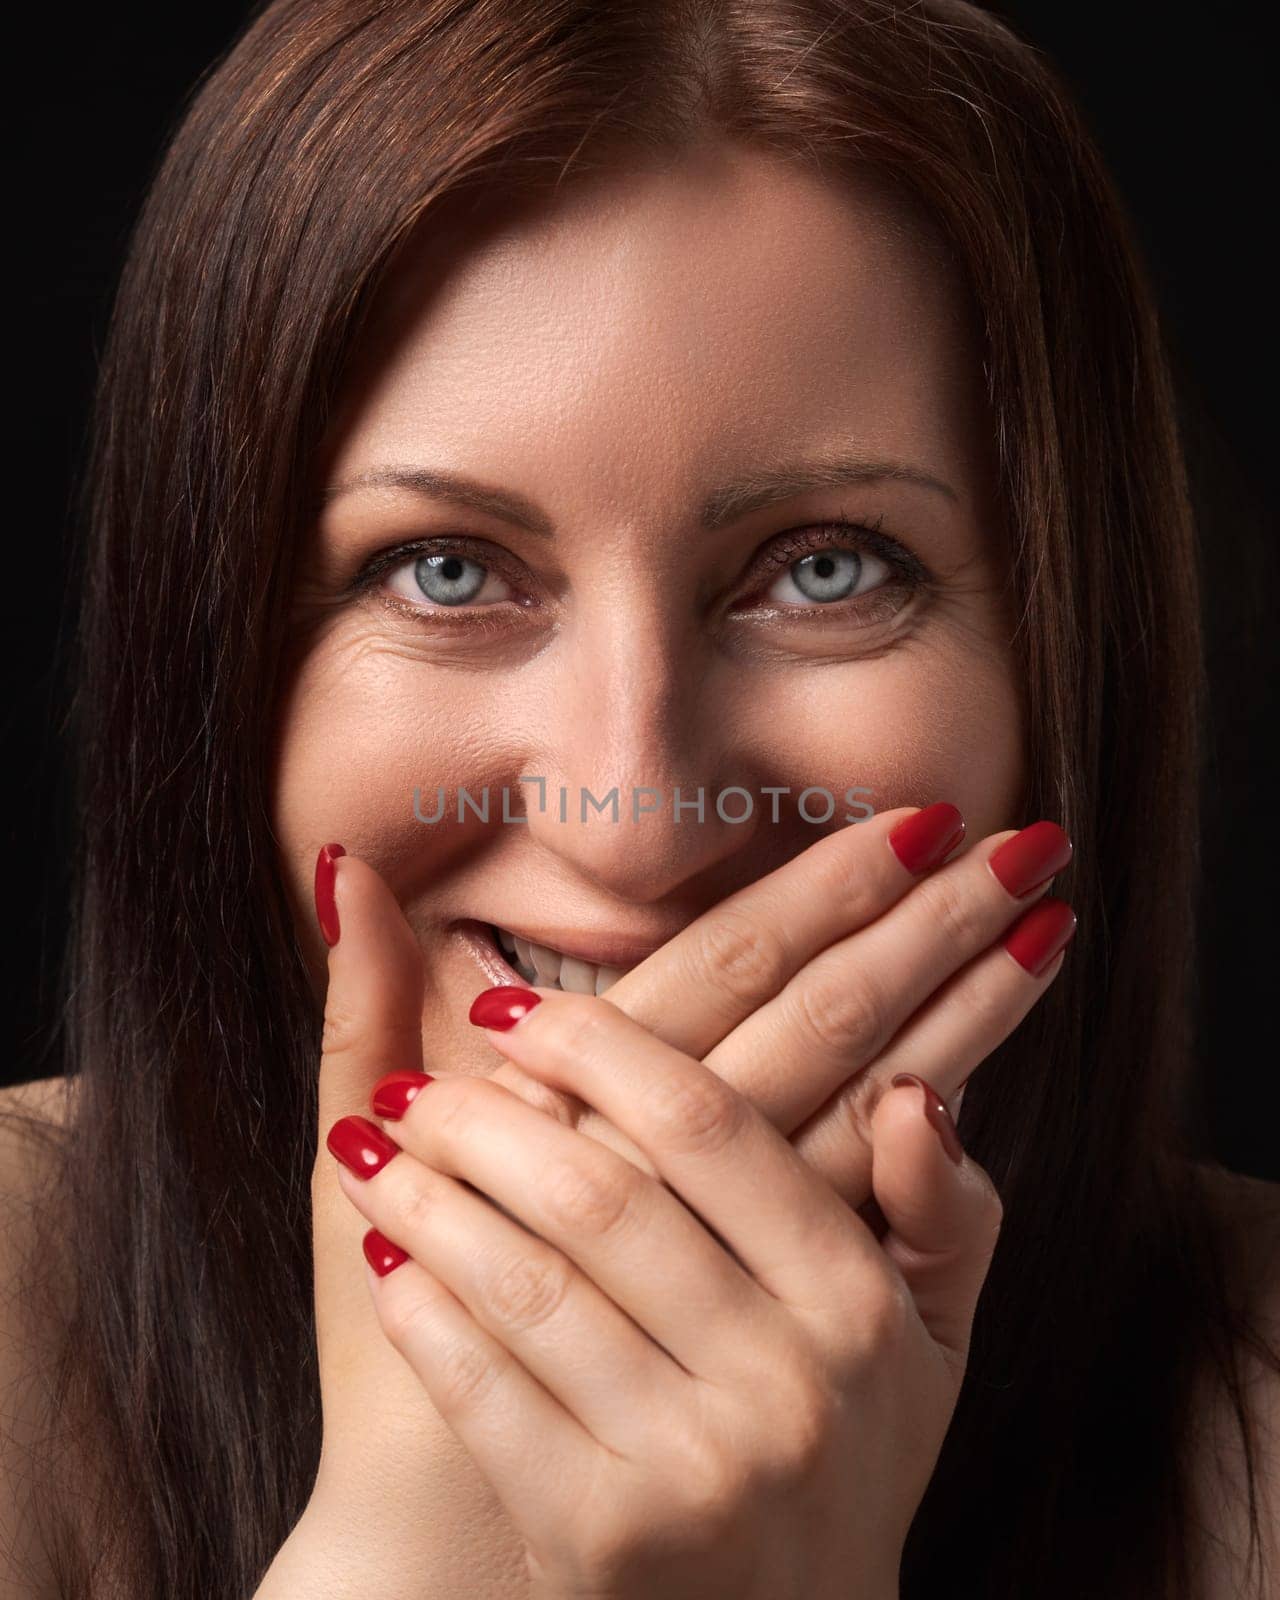 Cheerful charming woman laughing while covering mouth with her hands with red manicure on nails and gazing at camera. Studio portrait of Caucasian ethnicity 40-year-old brunette woman with gray eyes.